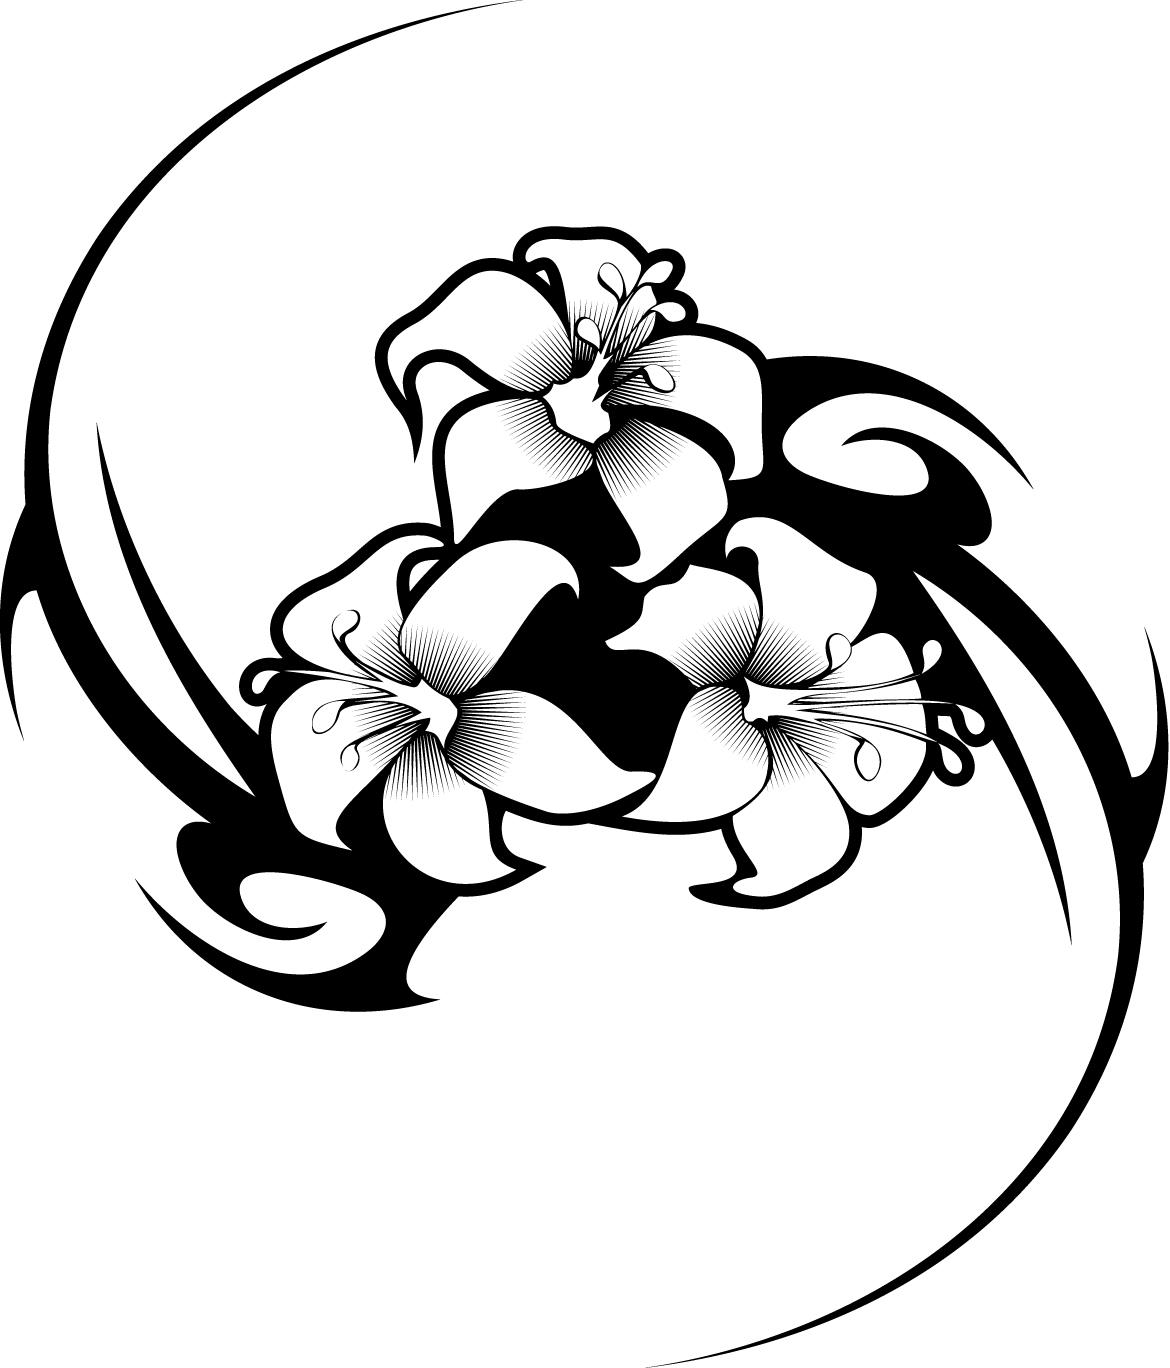 working sheet of a hibiscus flower tattoo tribal design - Coloring ...